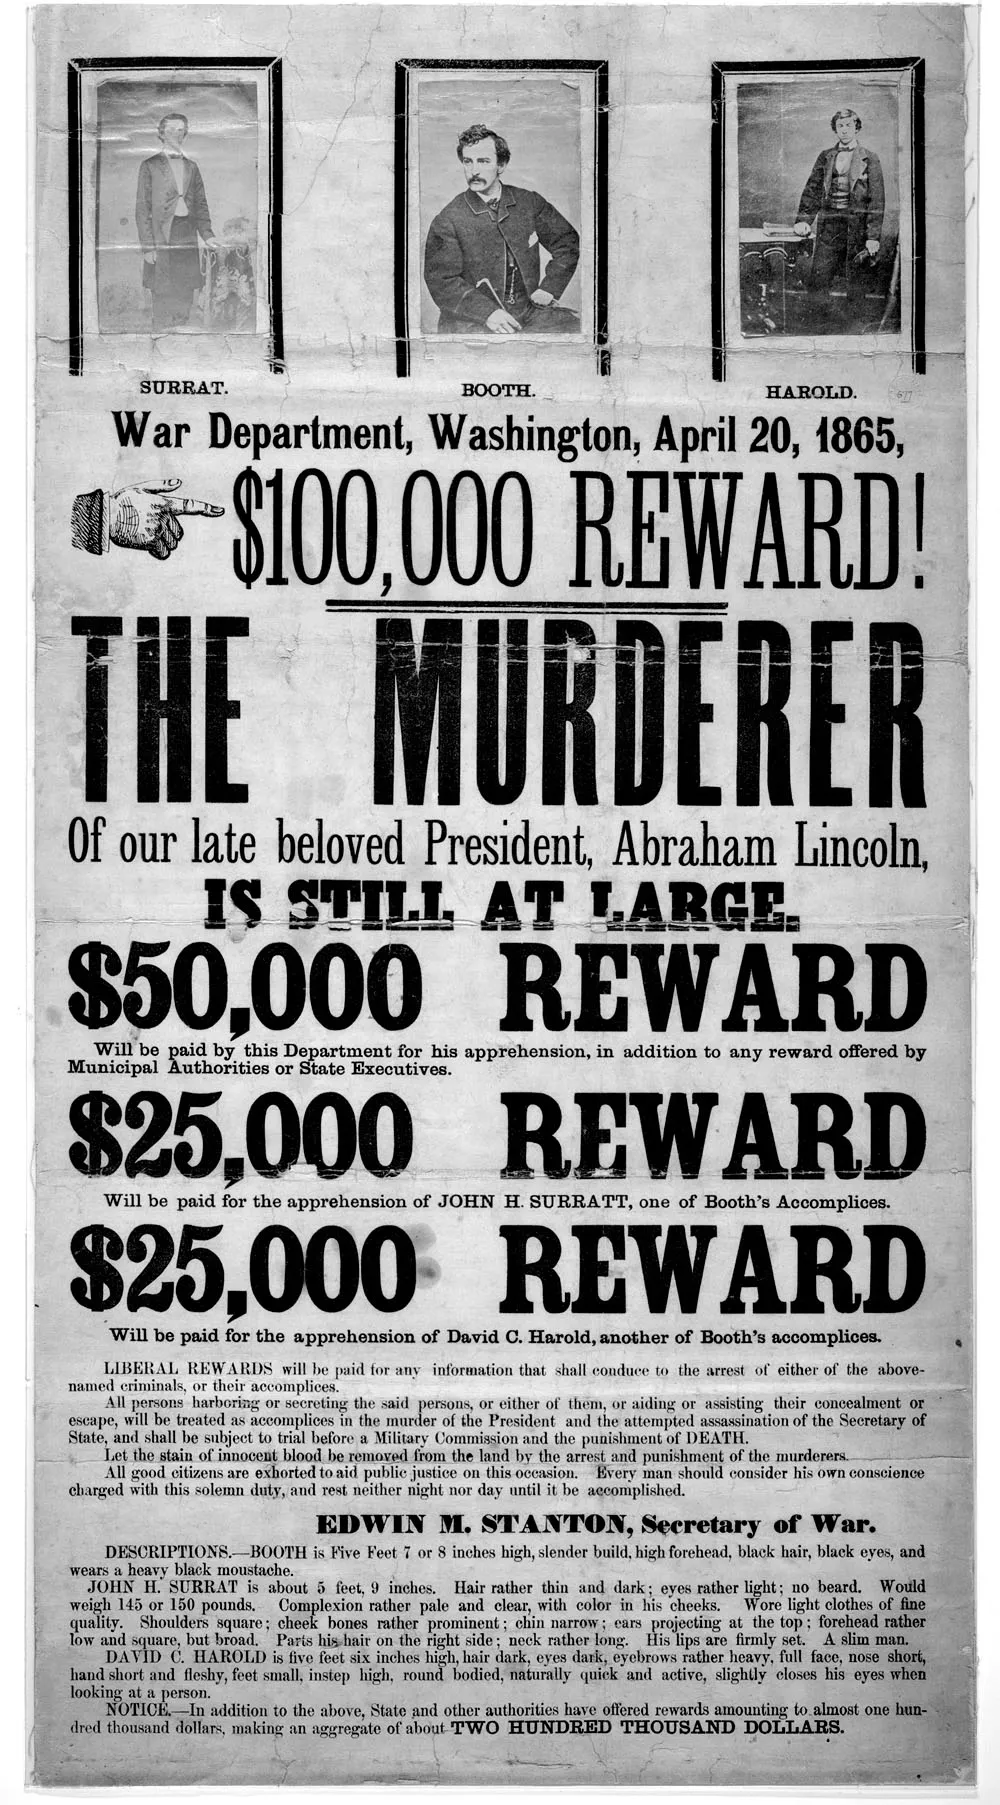 A wanted poster issued for Booth, Herold and John Surratt